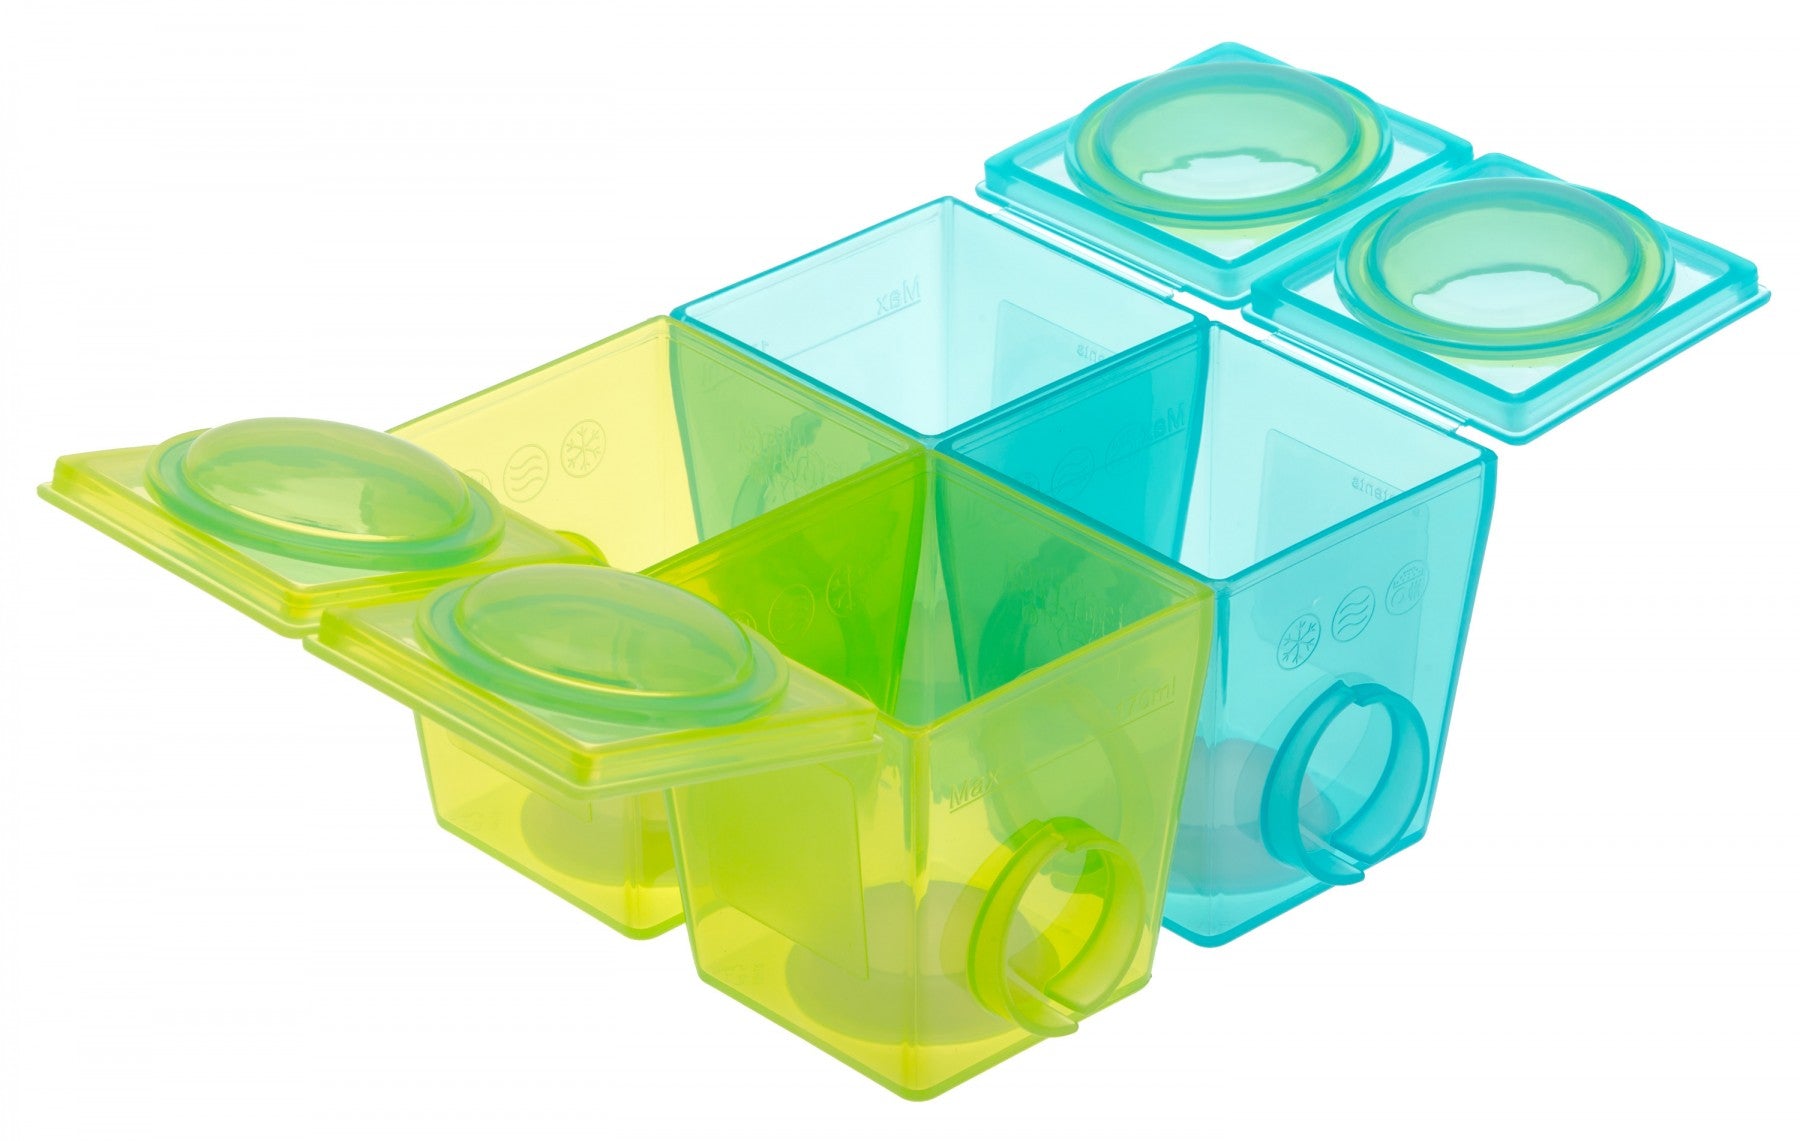 Brother Max - 2nd Stage Weaning Pots (Blue/ Green)